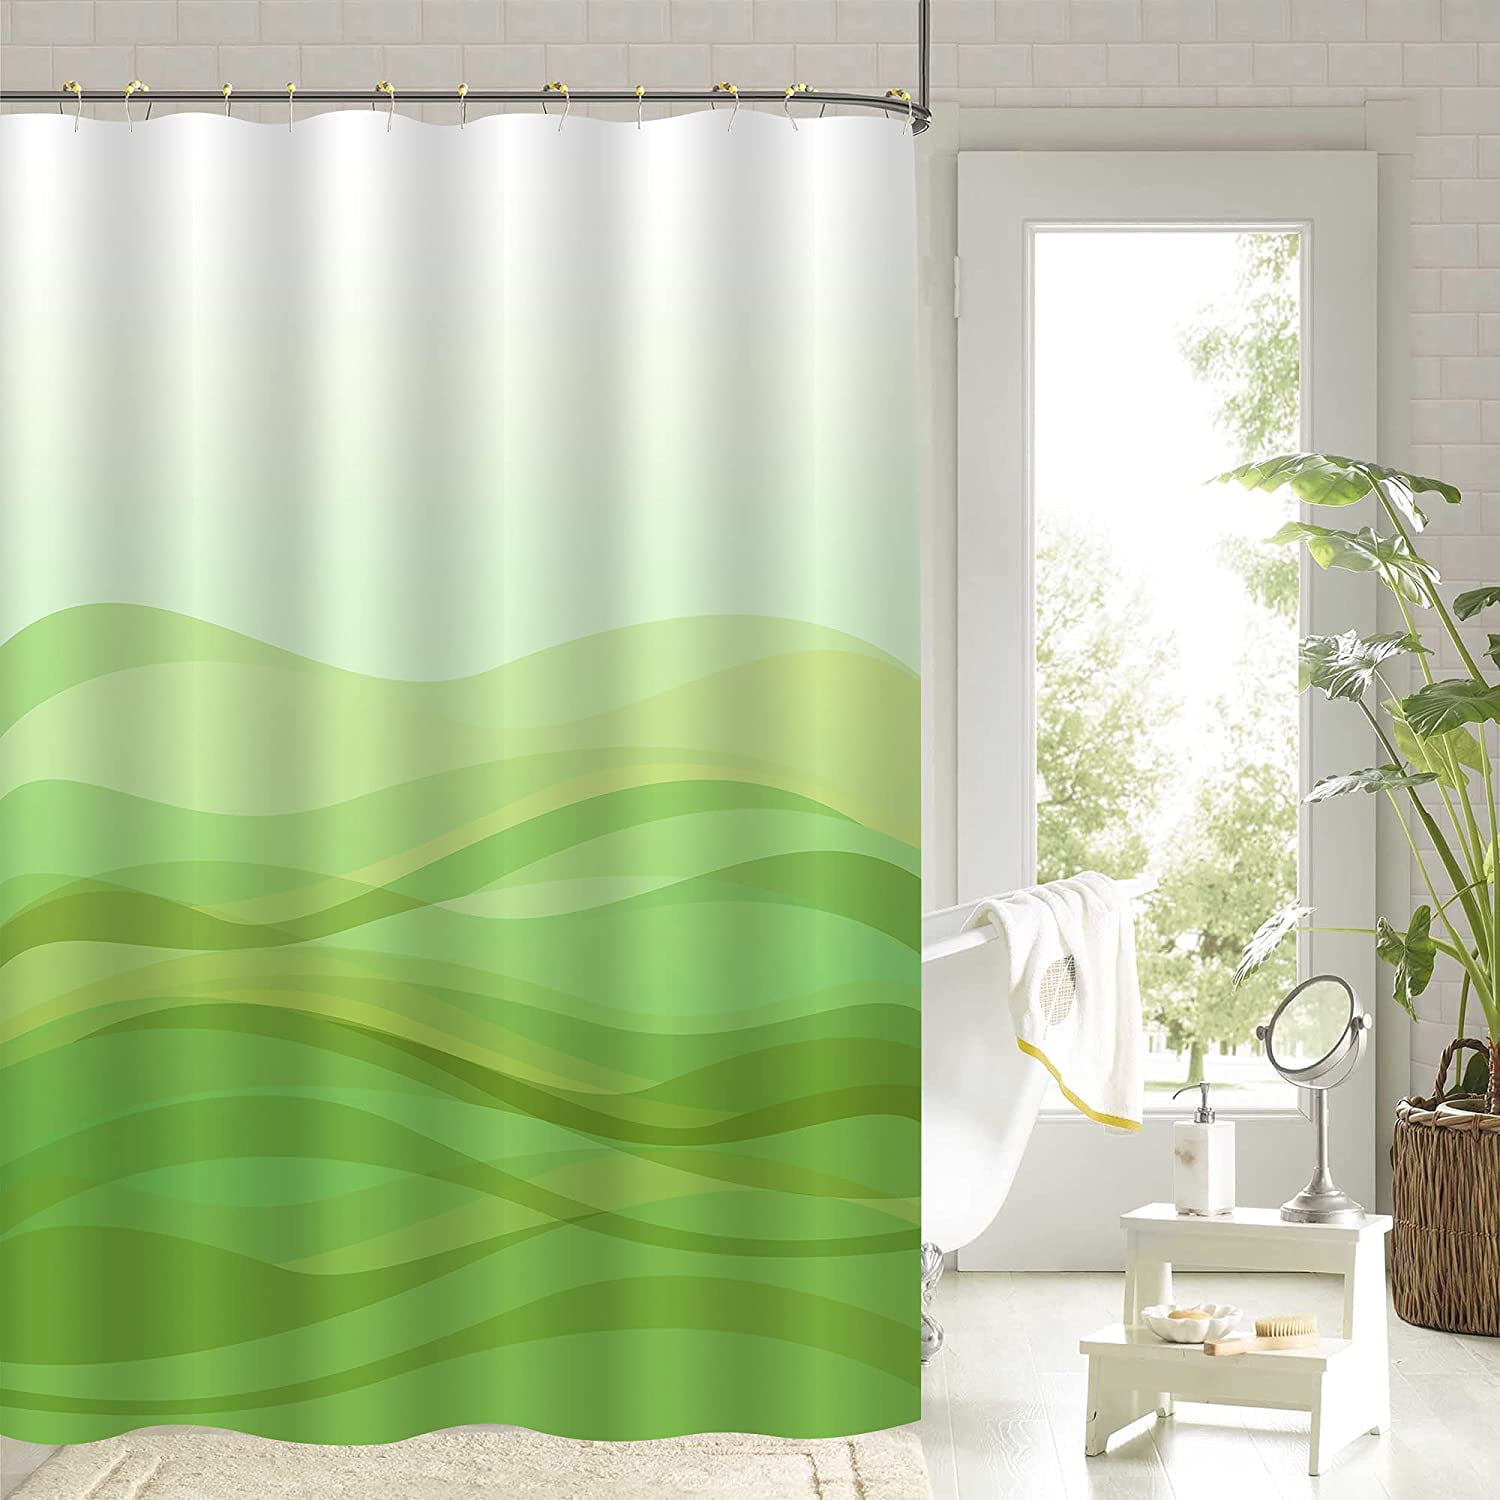 Details about   Tropical Green Plant Leaf Palm Cactus Shower Curtains Bathroom Frabic With Hooks 